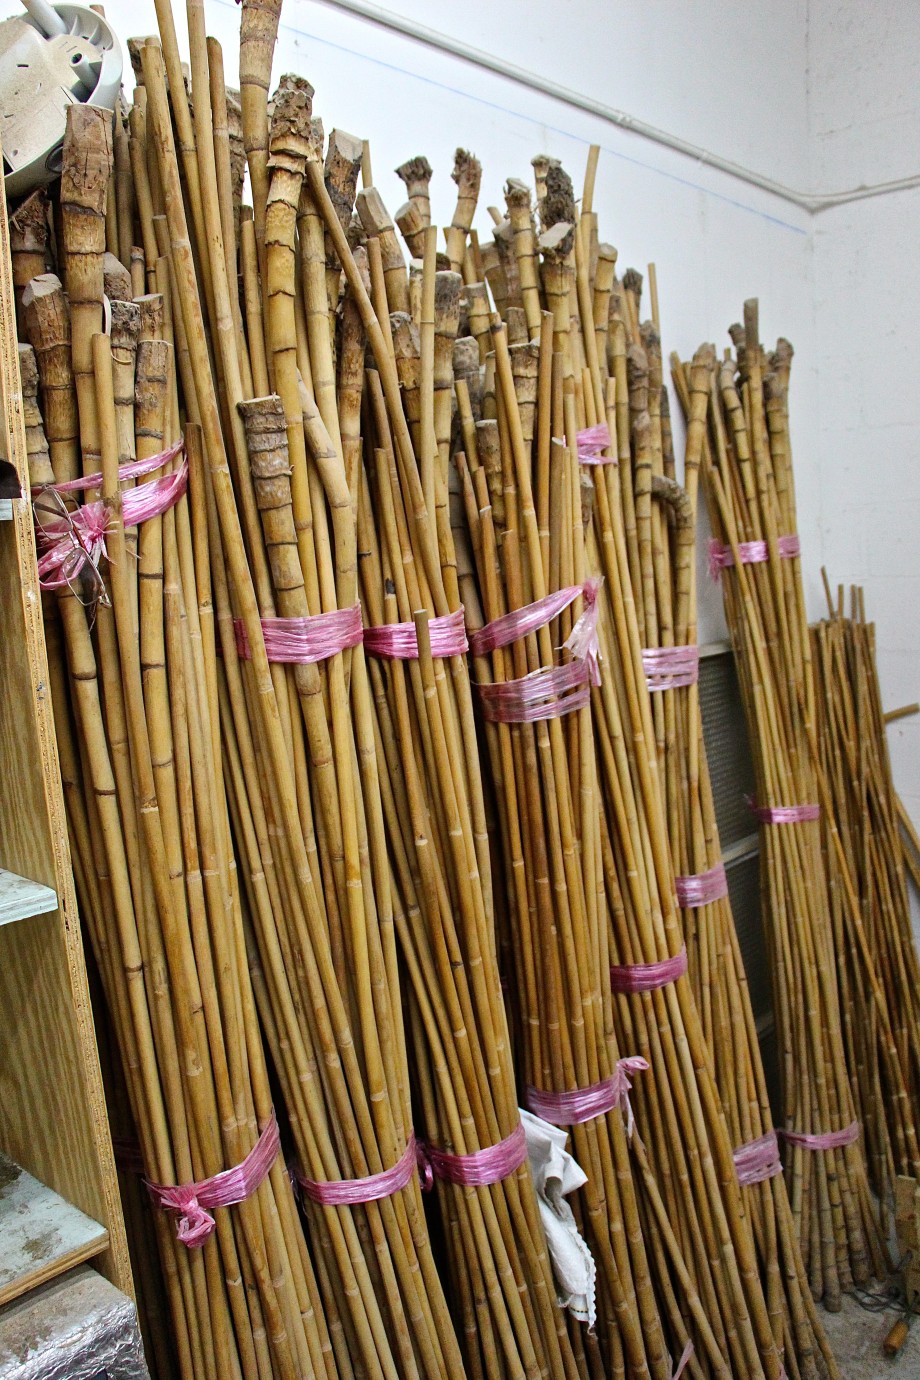 Mallet canes at Tato's Mallets